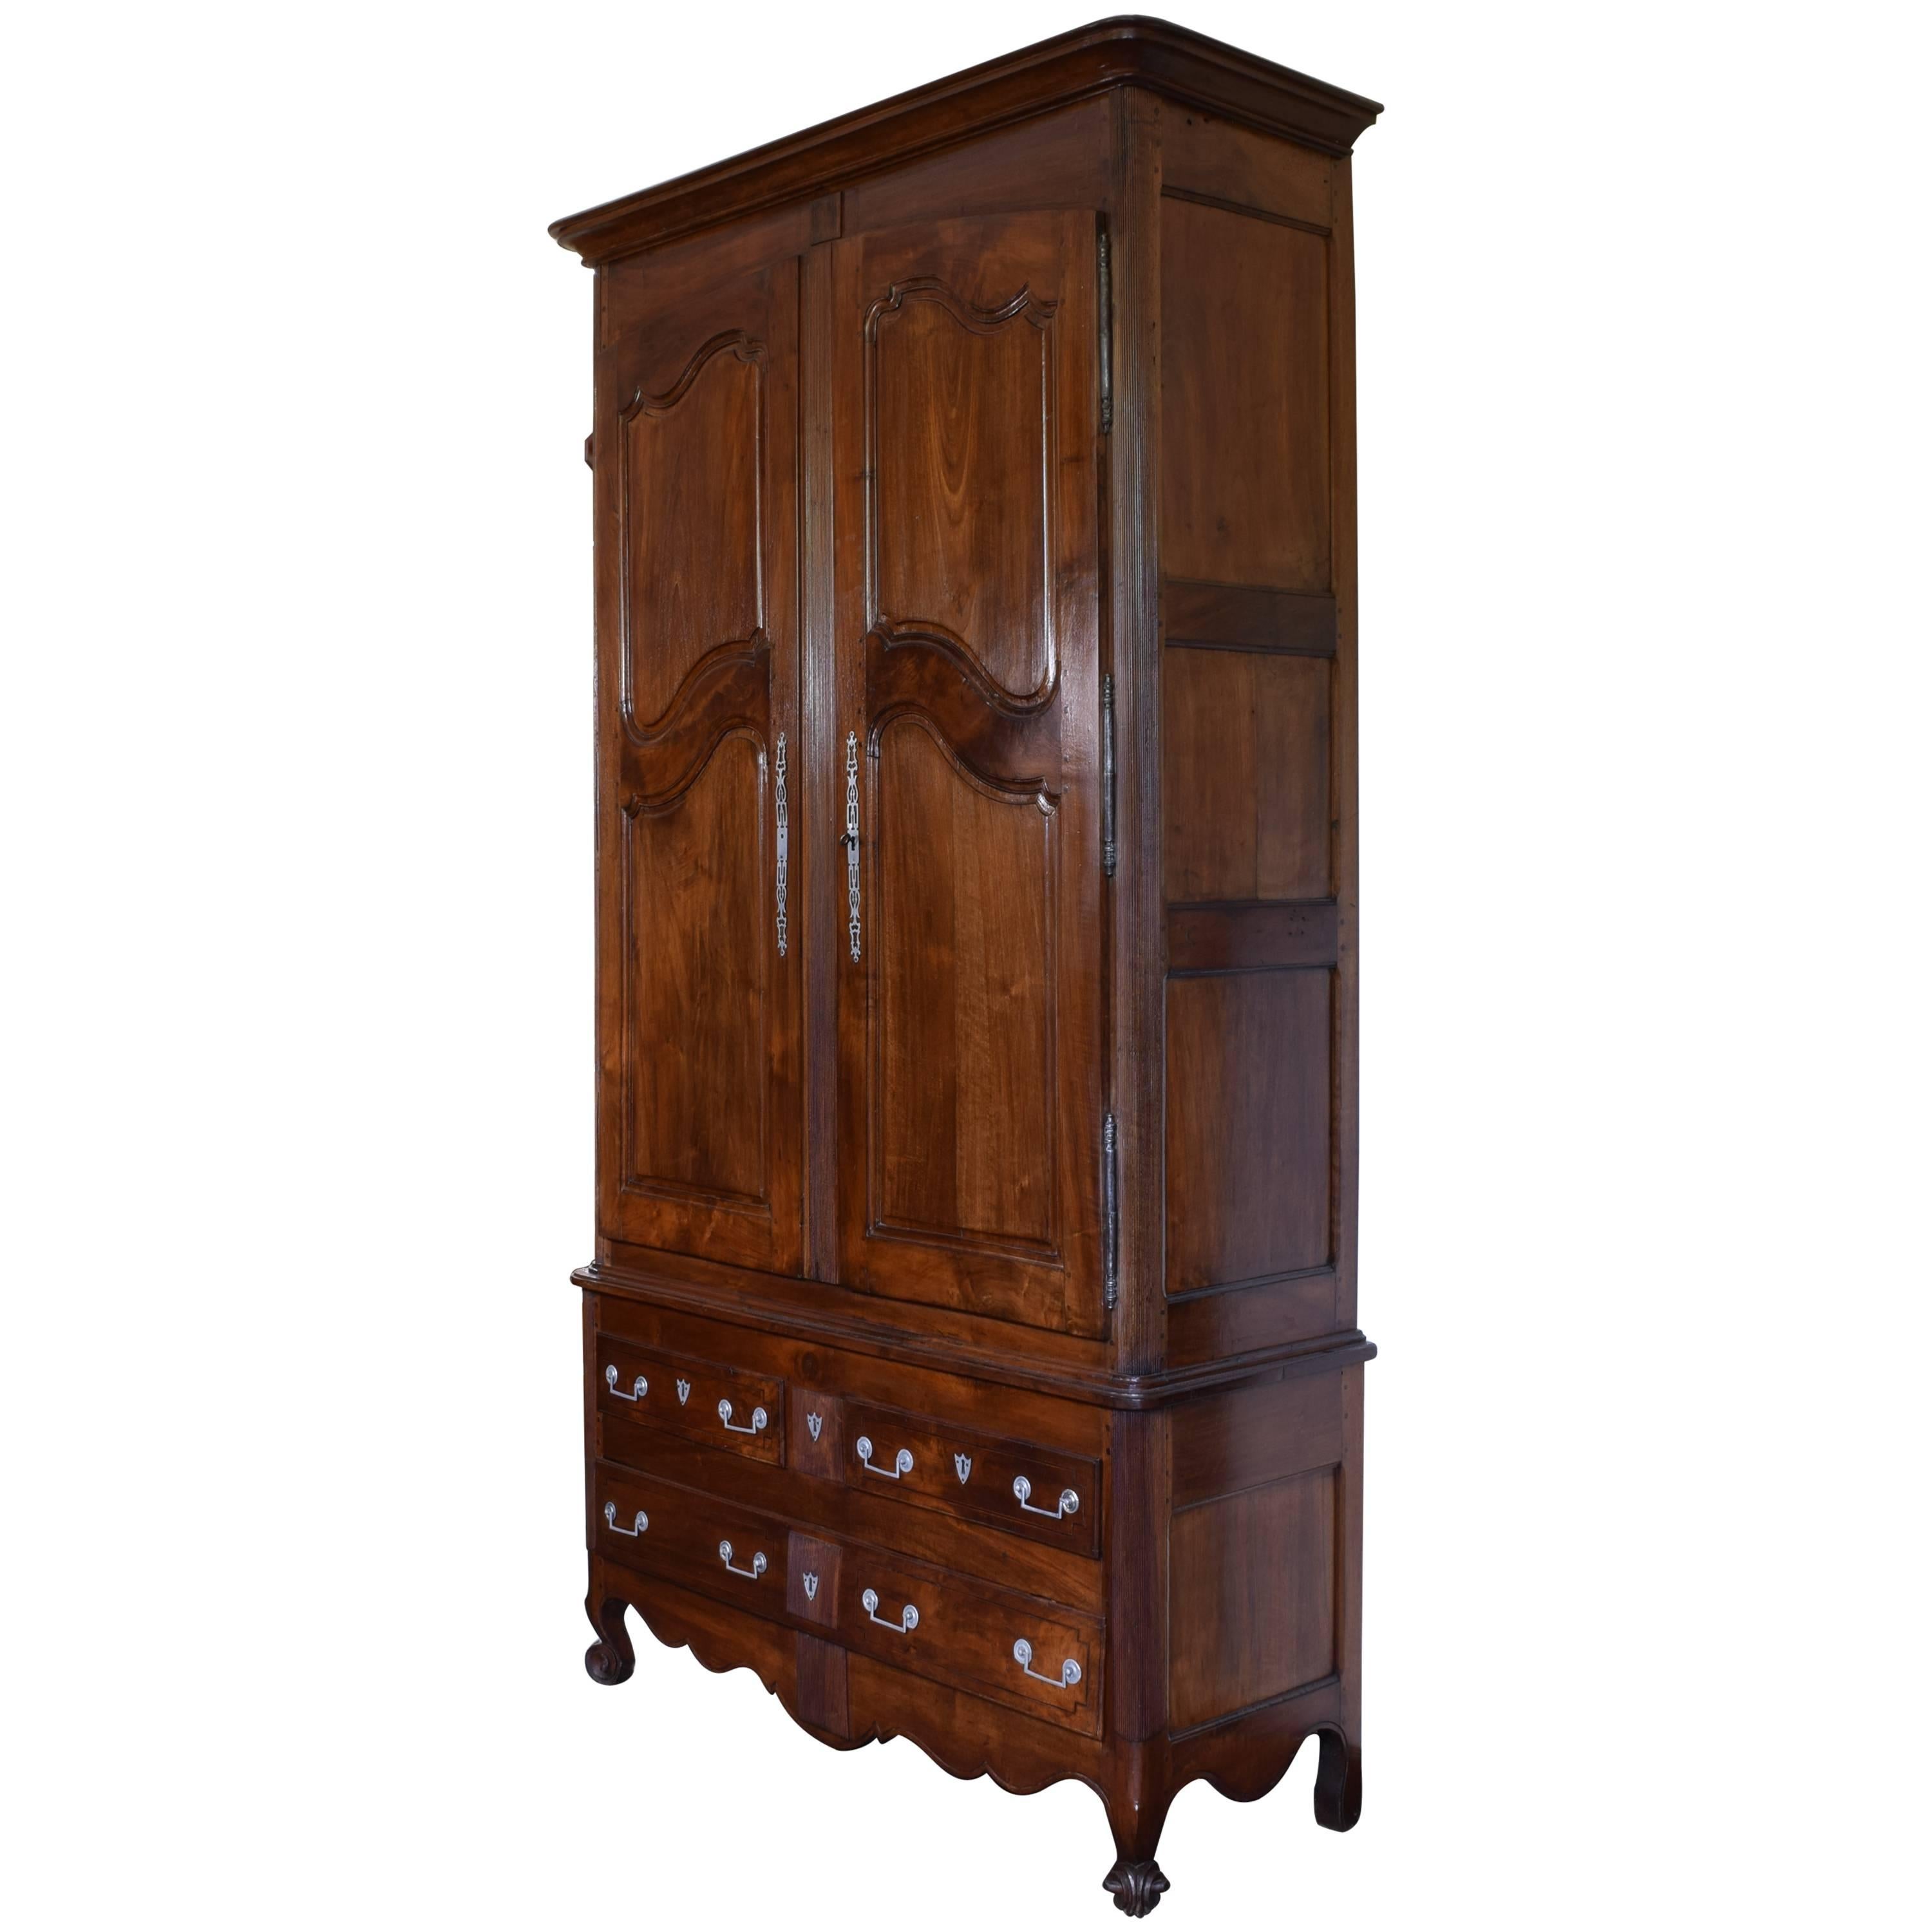 Tall Louis XV Period Walnut Armoire with Two-Drawer, 3rd Quarter 18th Century For Sale